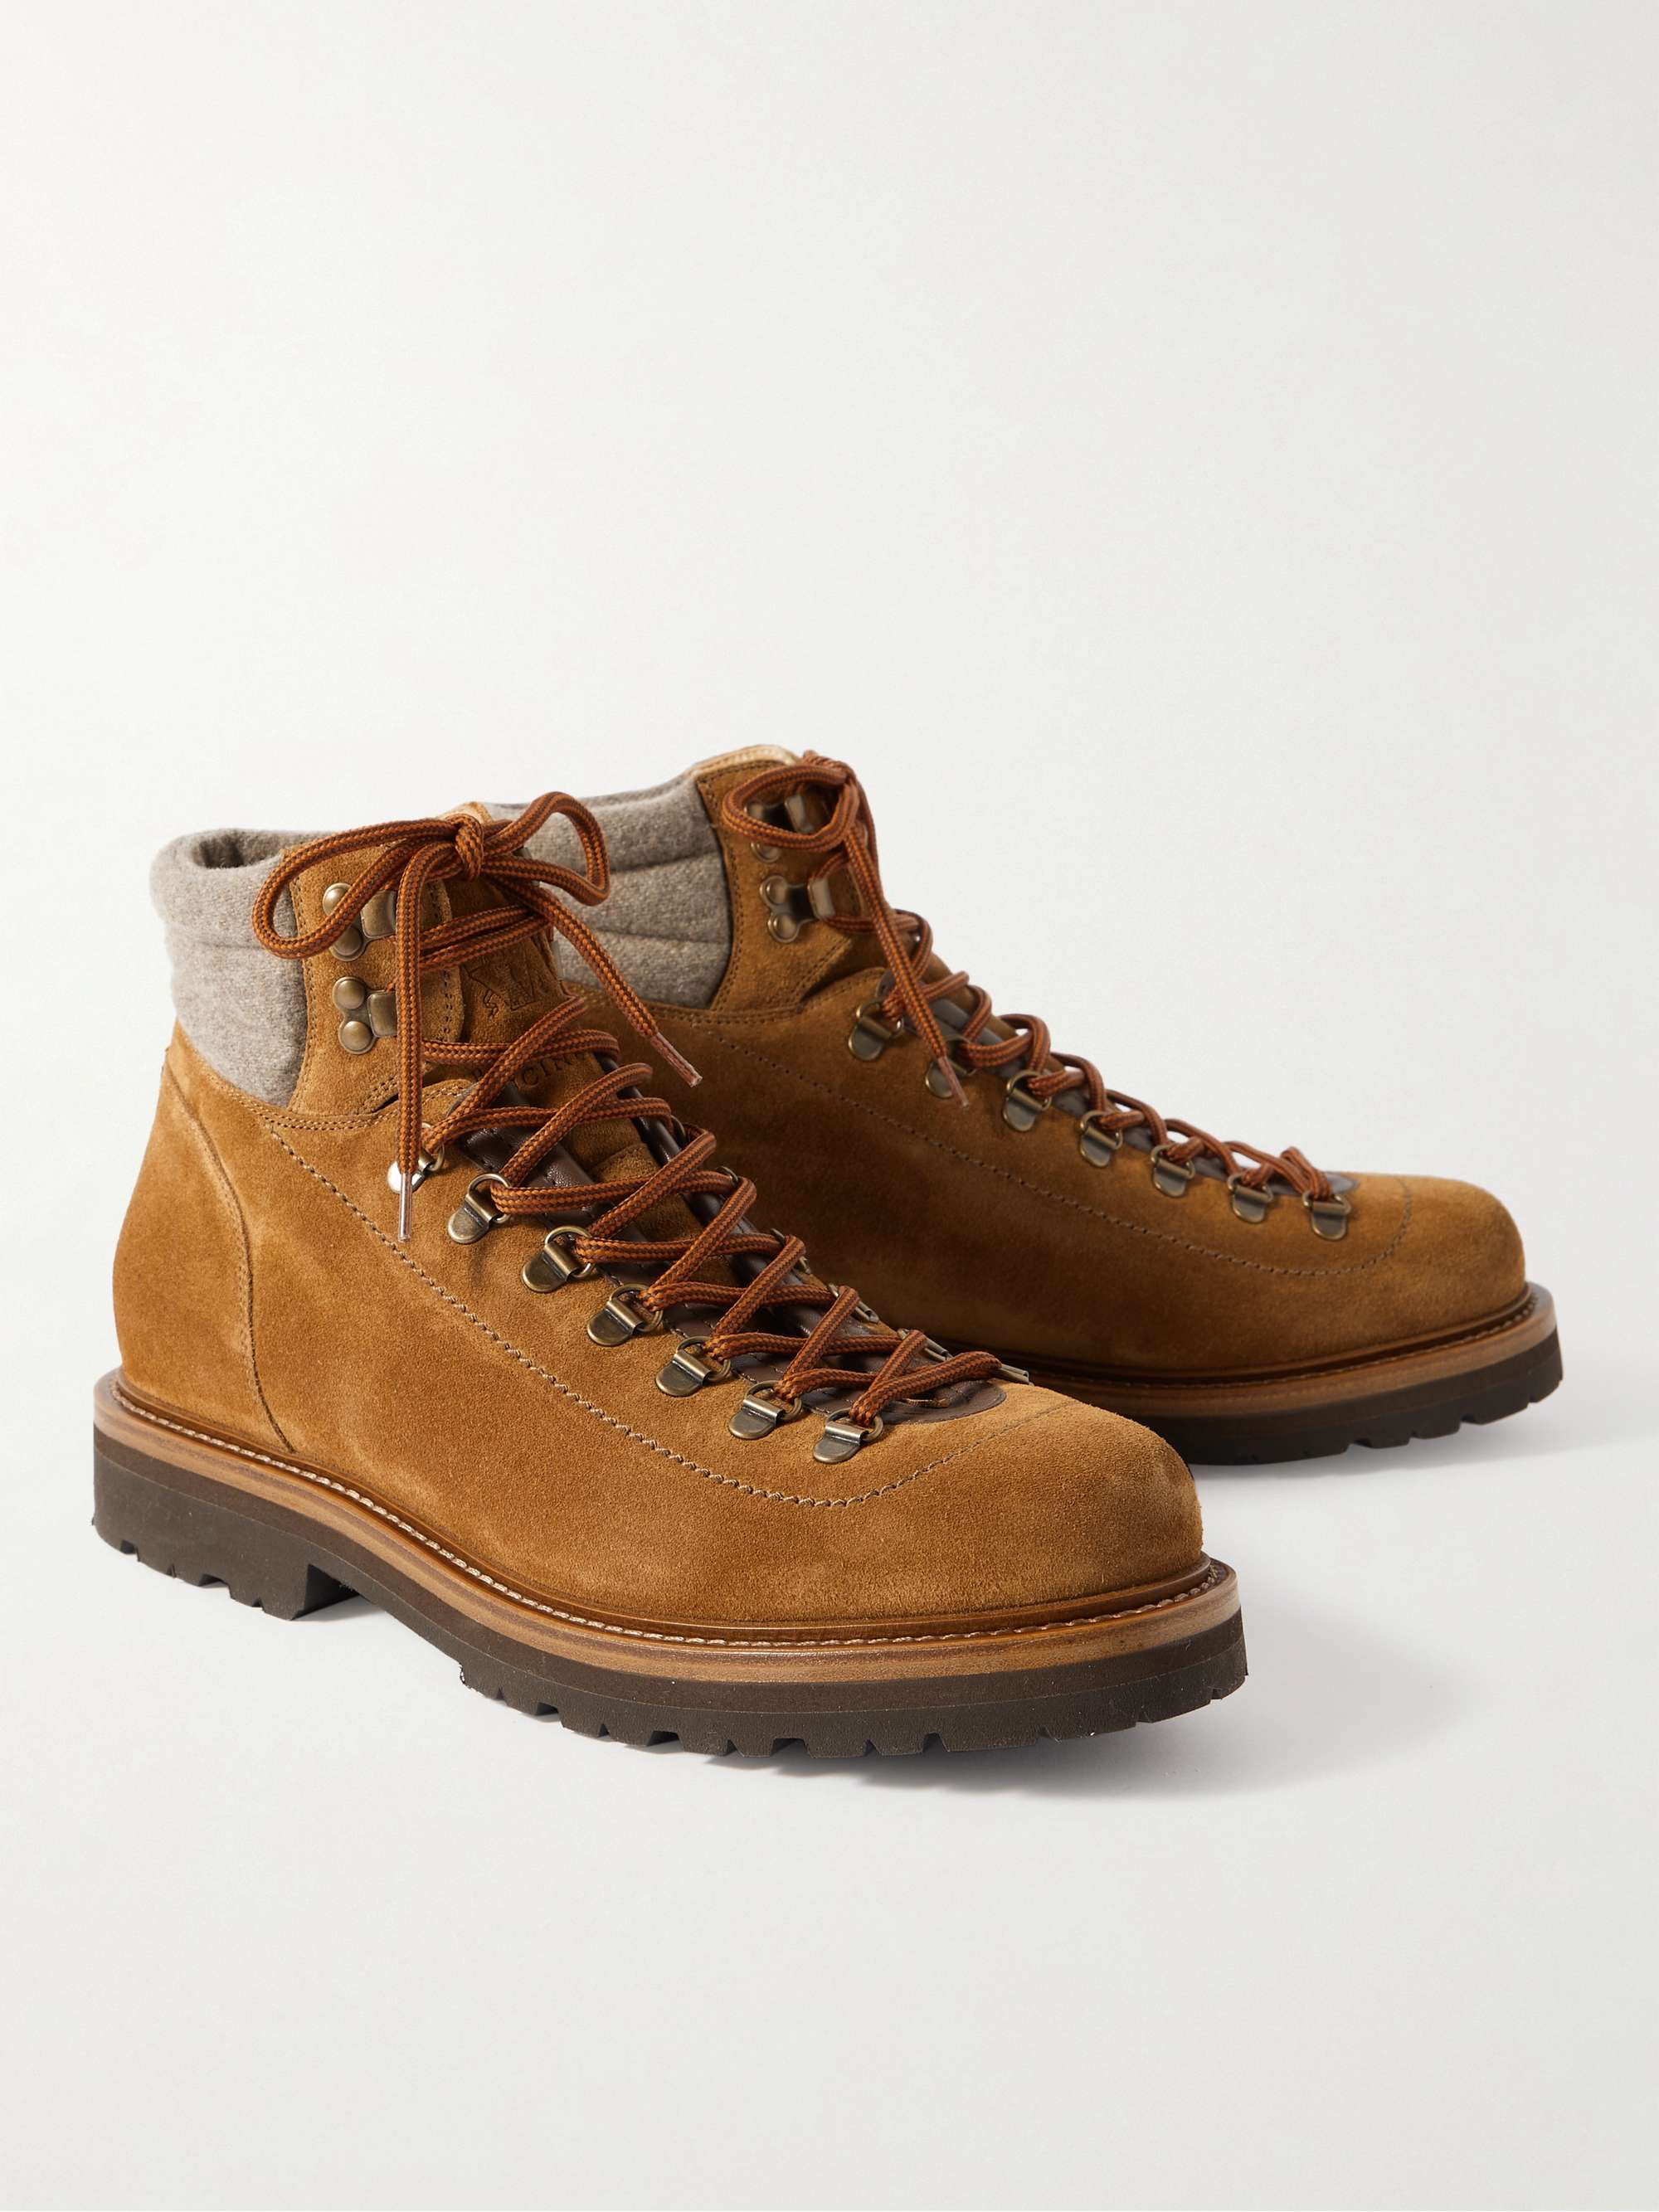 BRUNELLO CUCINELLI Wool-Trimmed Suede Hiking Boots